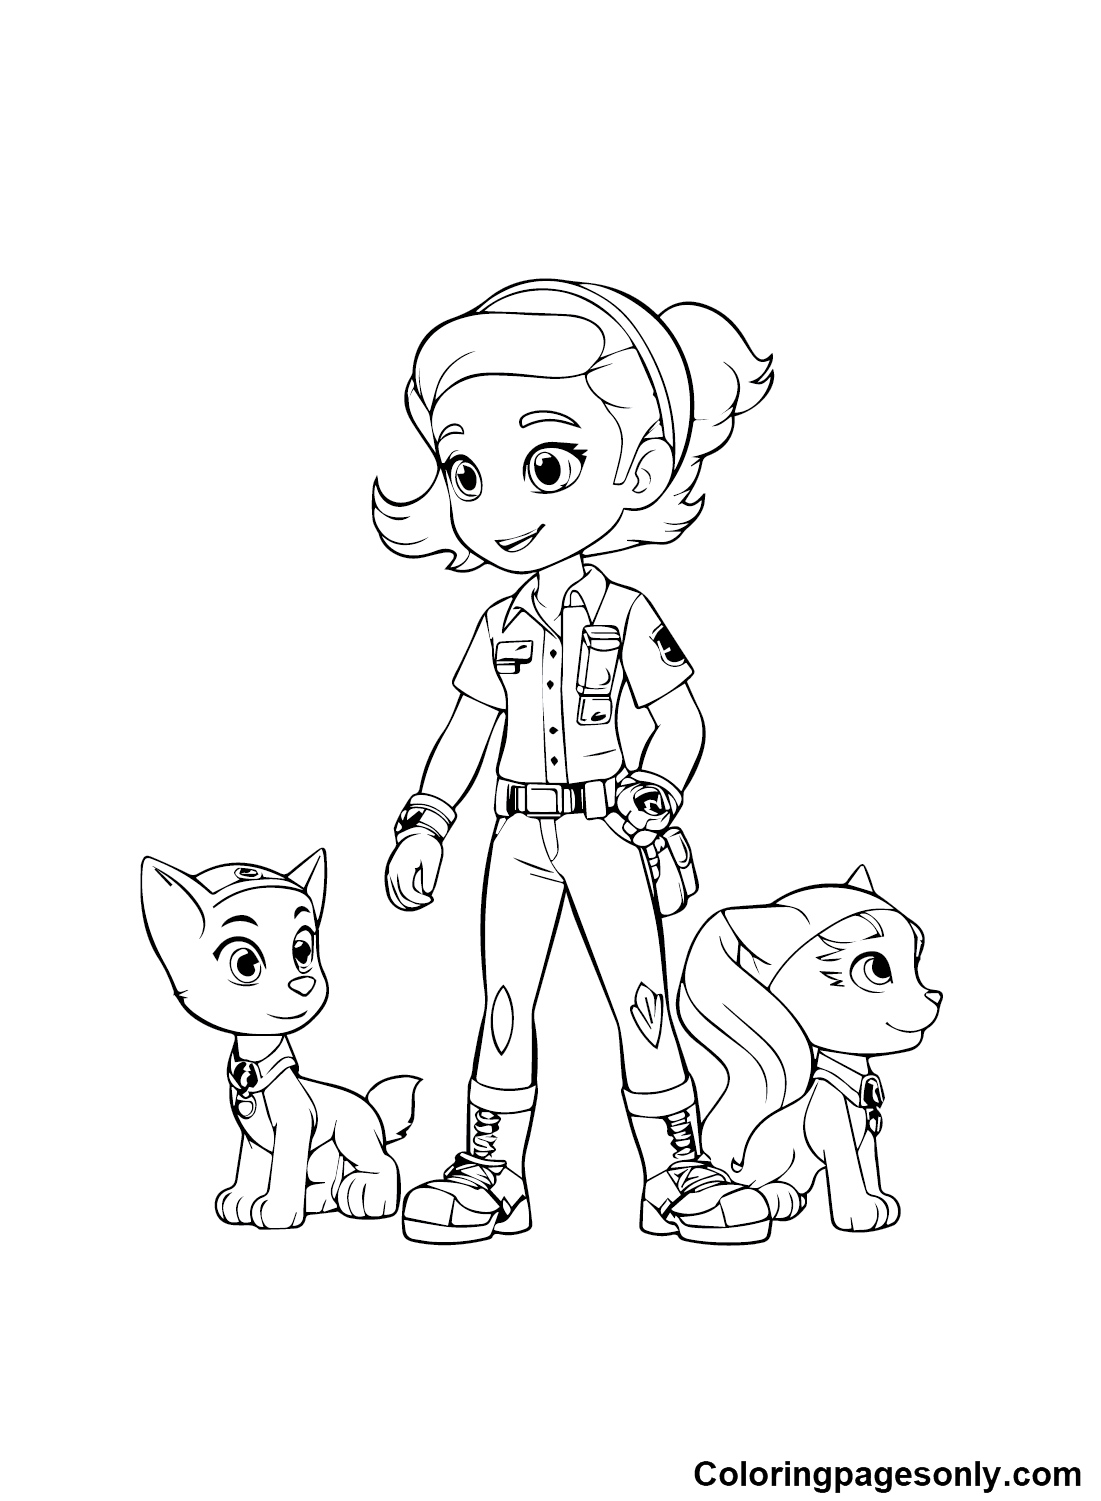 Rainbow Rangers Printable Coloring Page